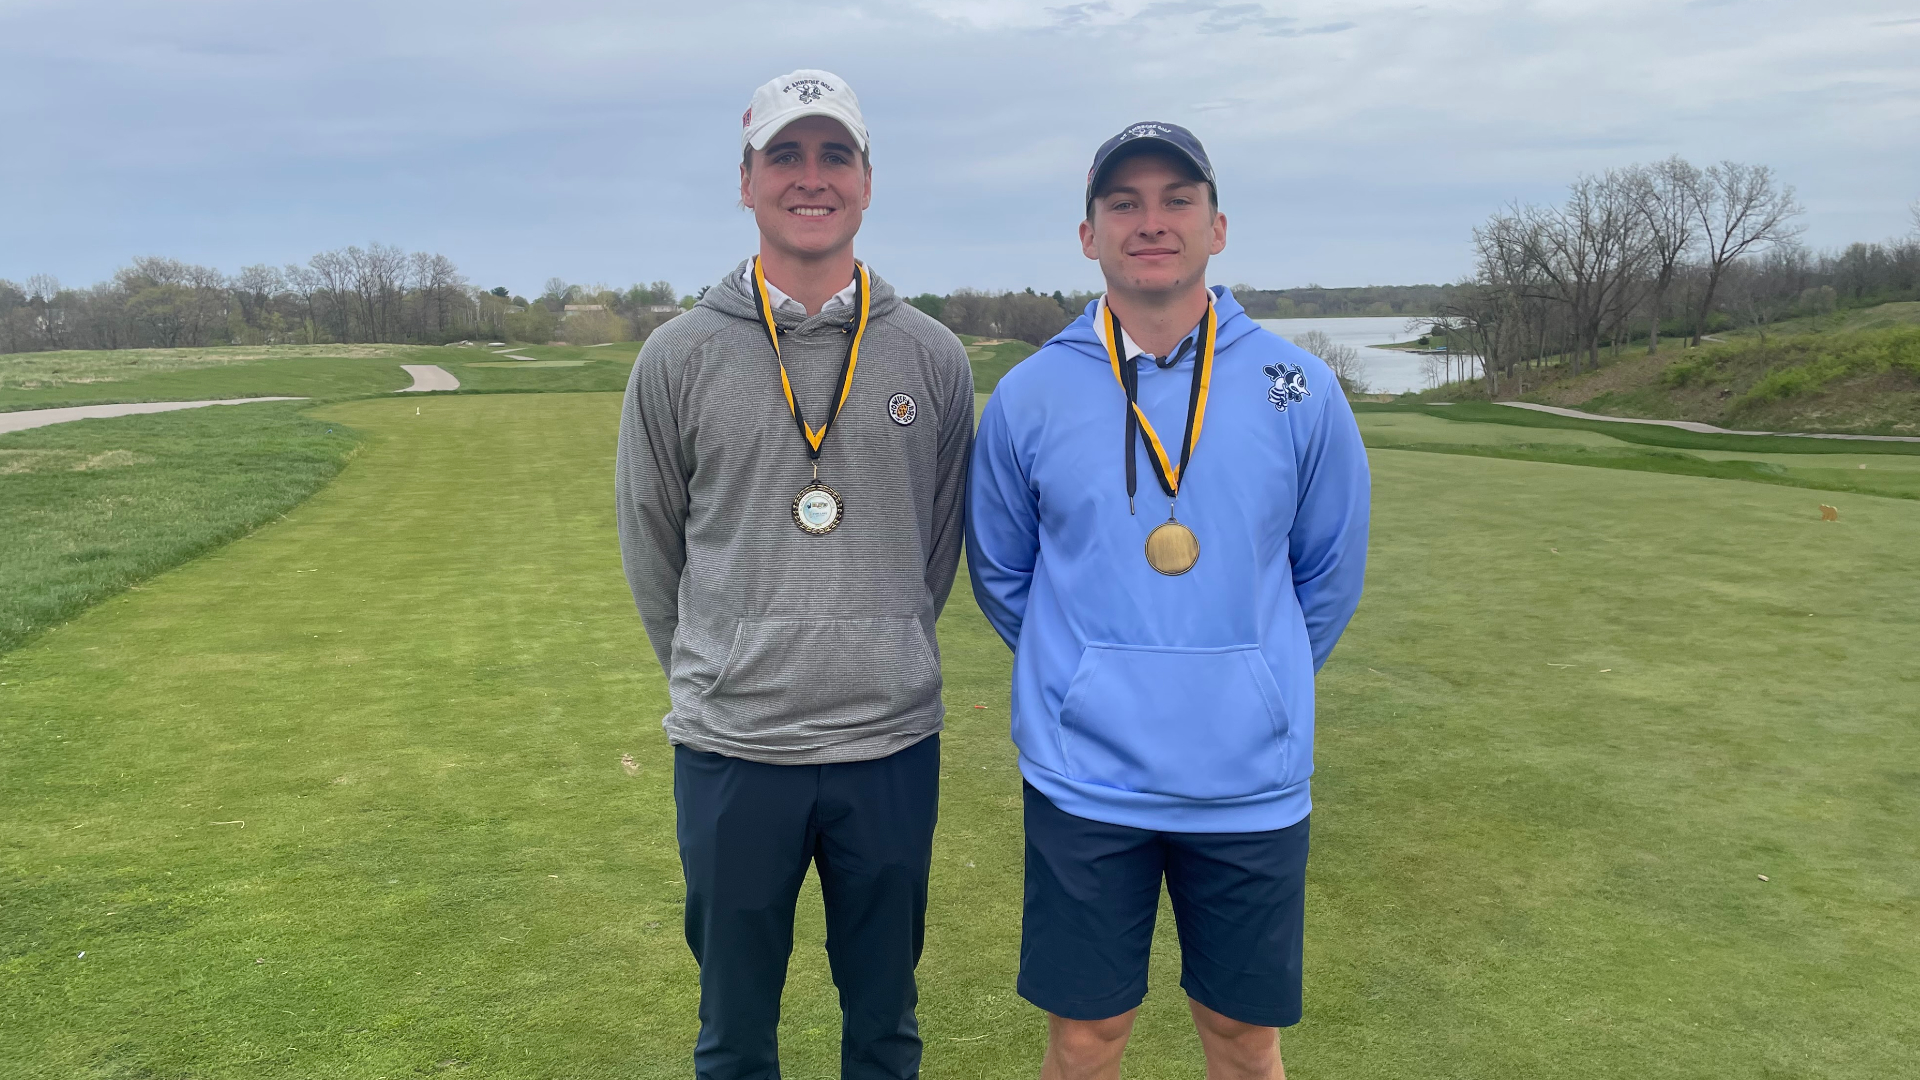 Stoetzel, Theis earn top-five finishes at Fyre Lake